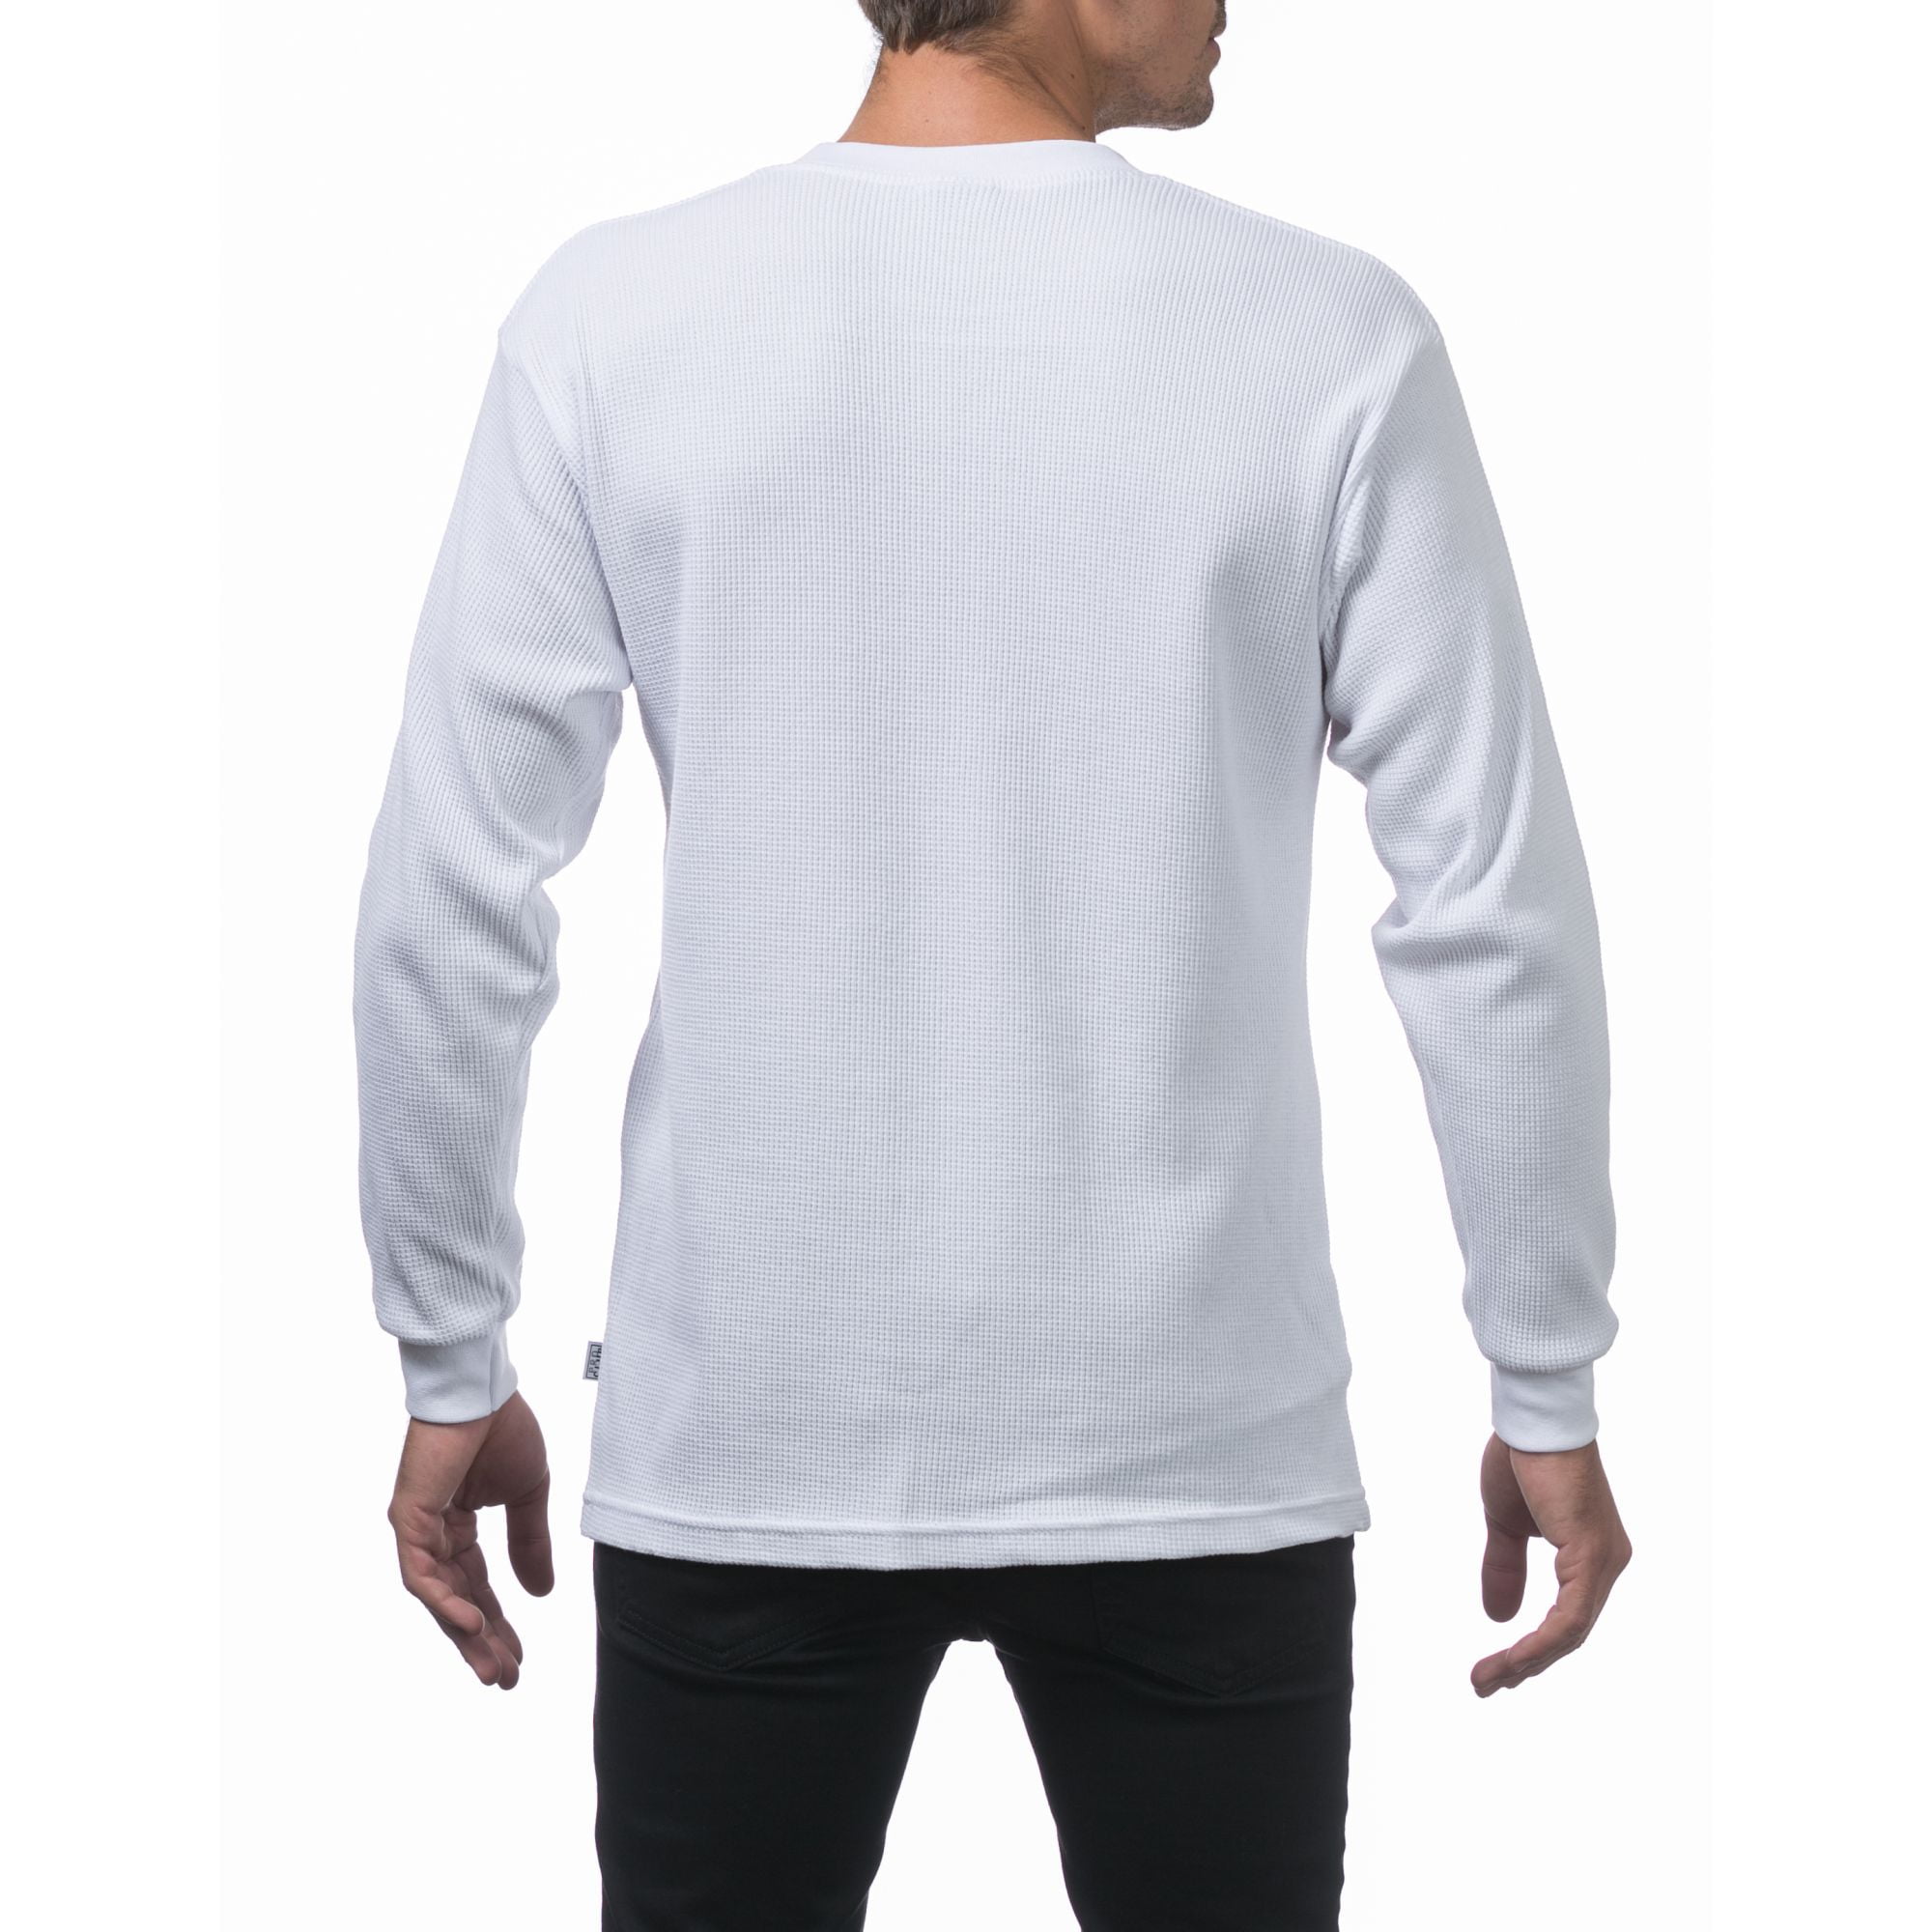 Pro Club Mens Heavyweight Cotton Long Sleeve Thermal Top 